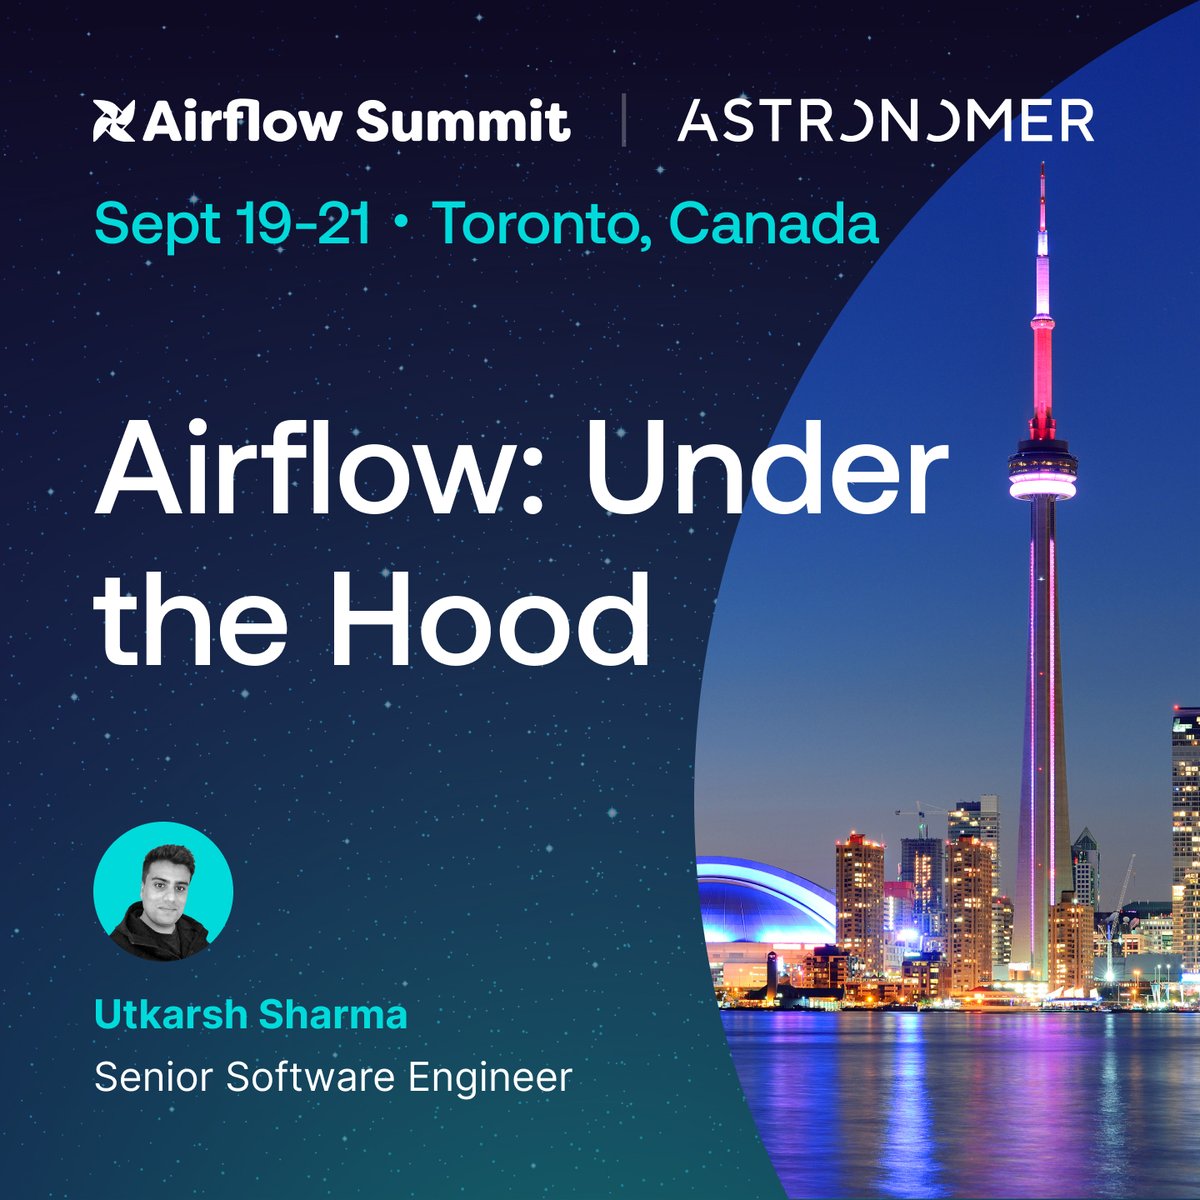 Explore what's under the hood of #Airflow @AirflowSummit! 🚗

Utkarsh Sharma, Sr Software Engineer, will take you on a deep dive into the codebase & demystify key concepts. 🛠️ 

🎟️ Get 30% off with 30DISC_ASTRONOMER. 
Register now: bit.ly/3Q5WZip

#AirflowSummit2023